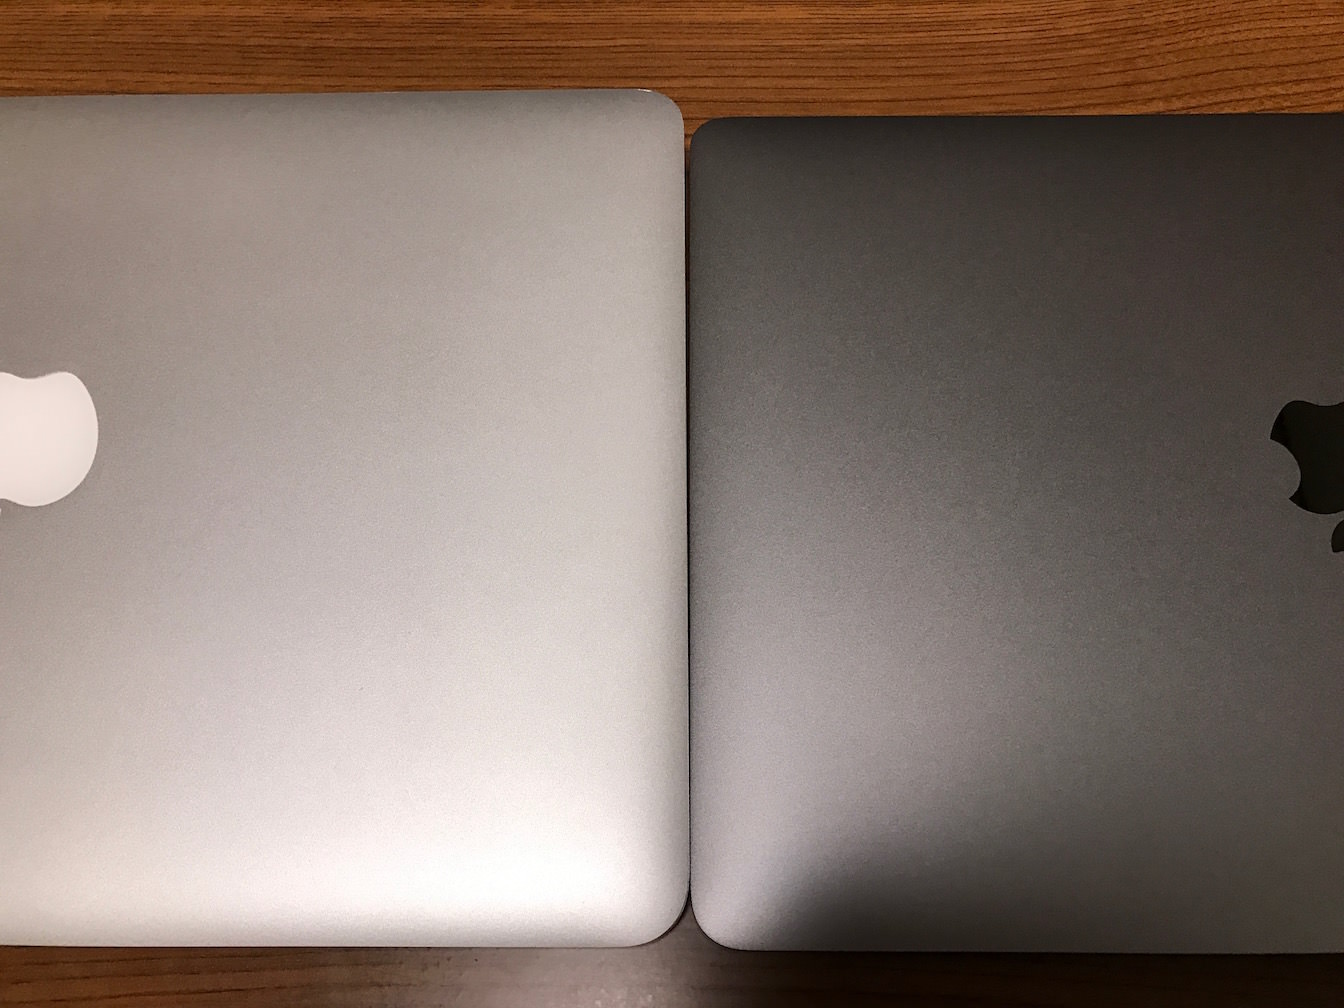 Macbook pro late 2016 13inch first impression 19